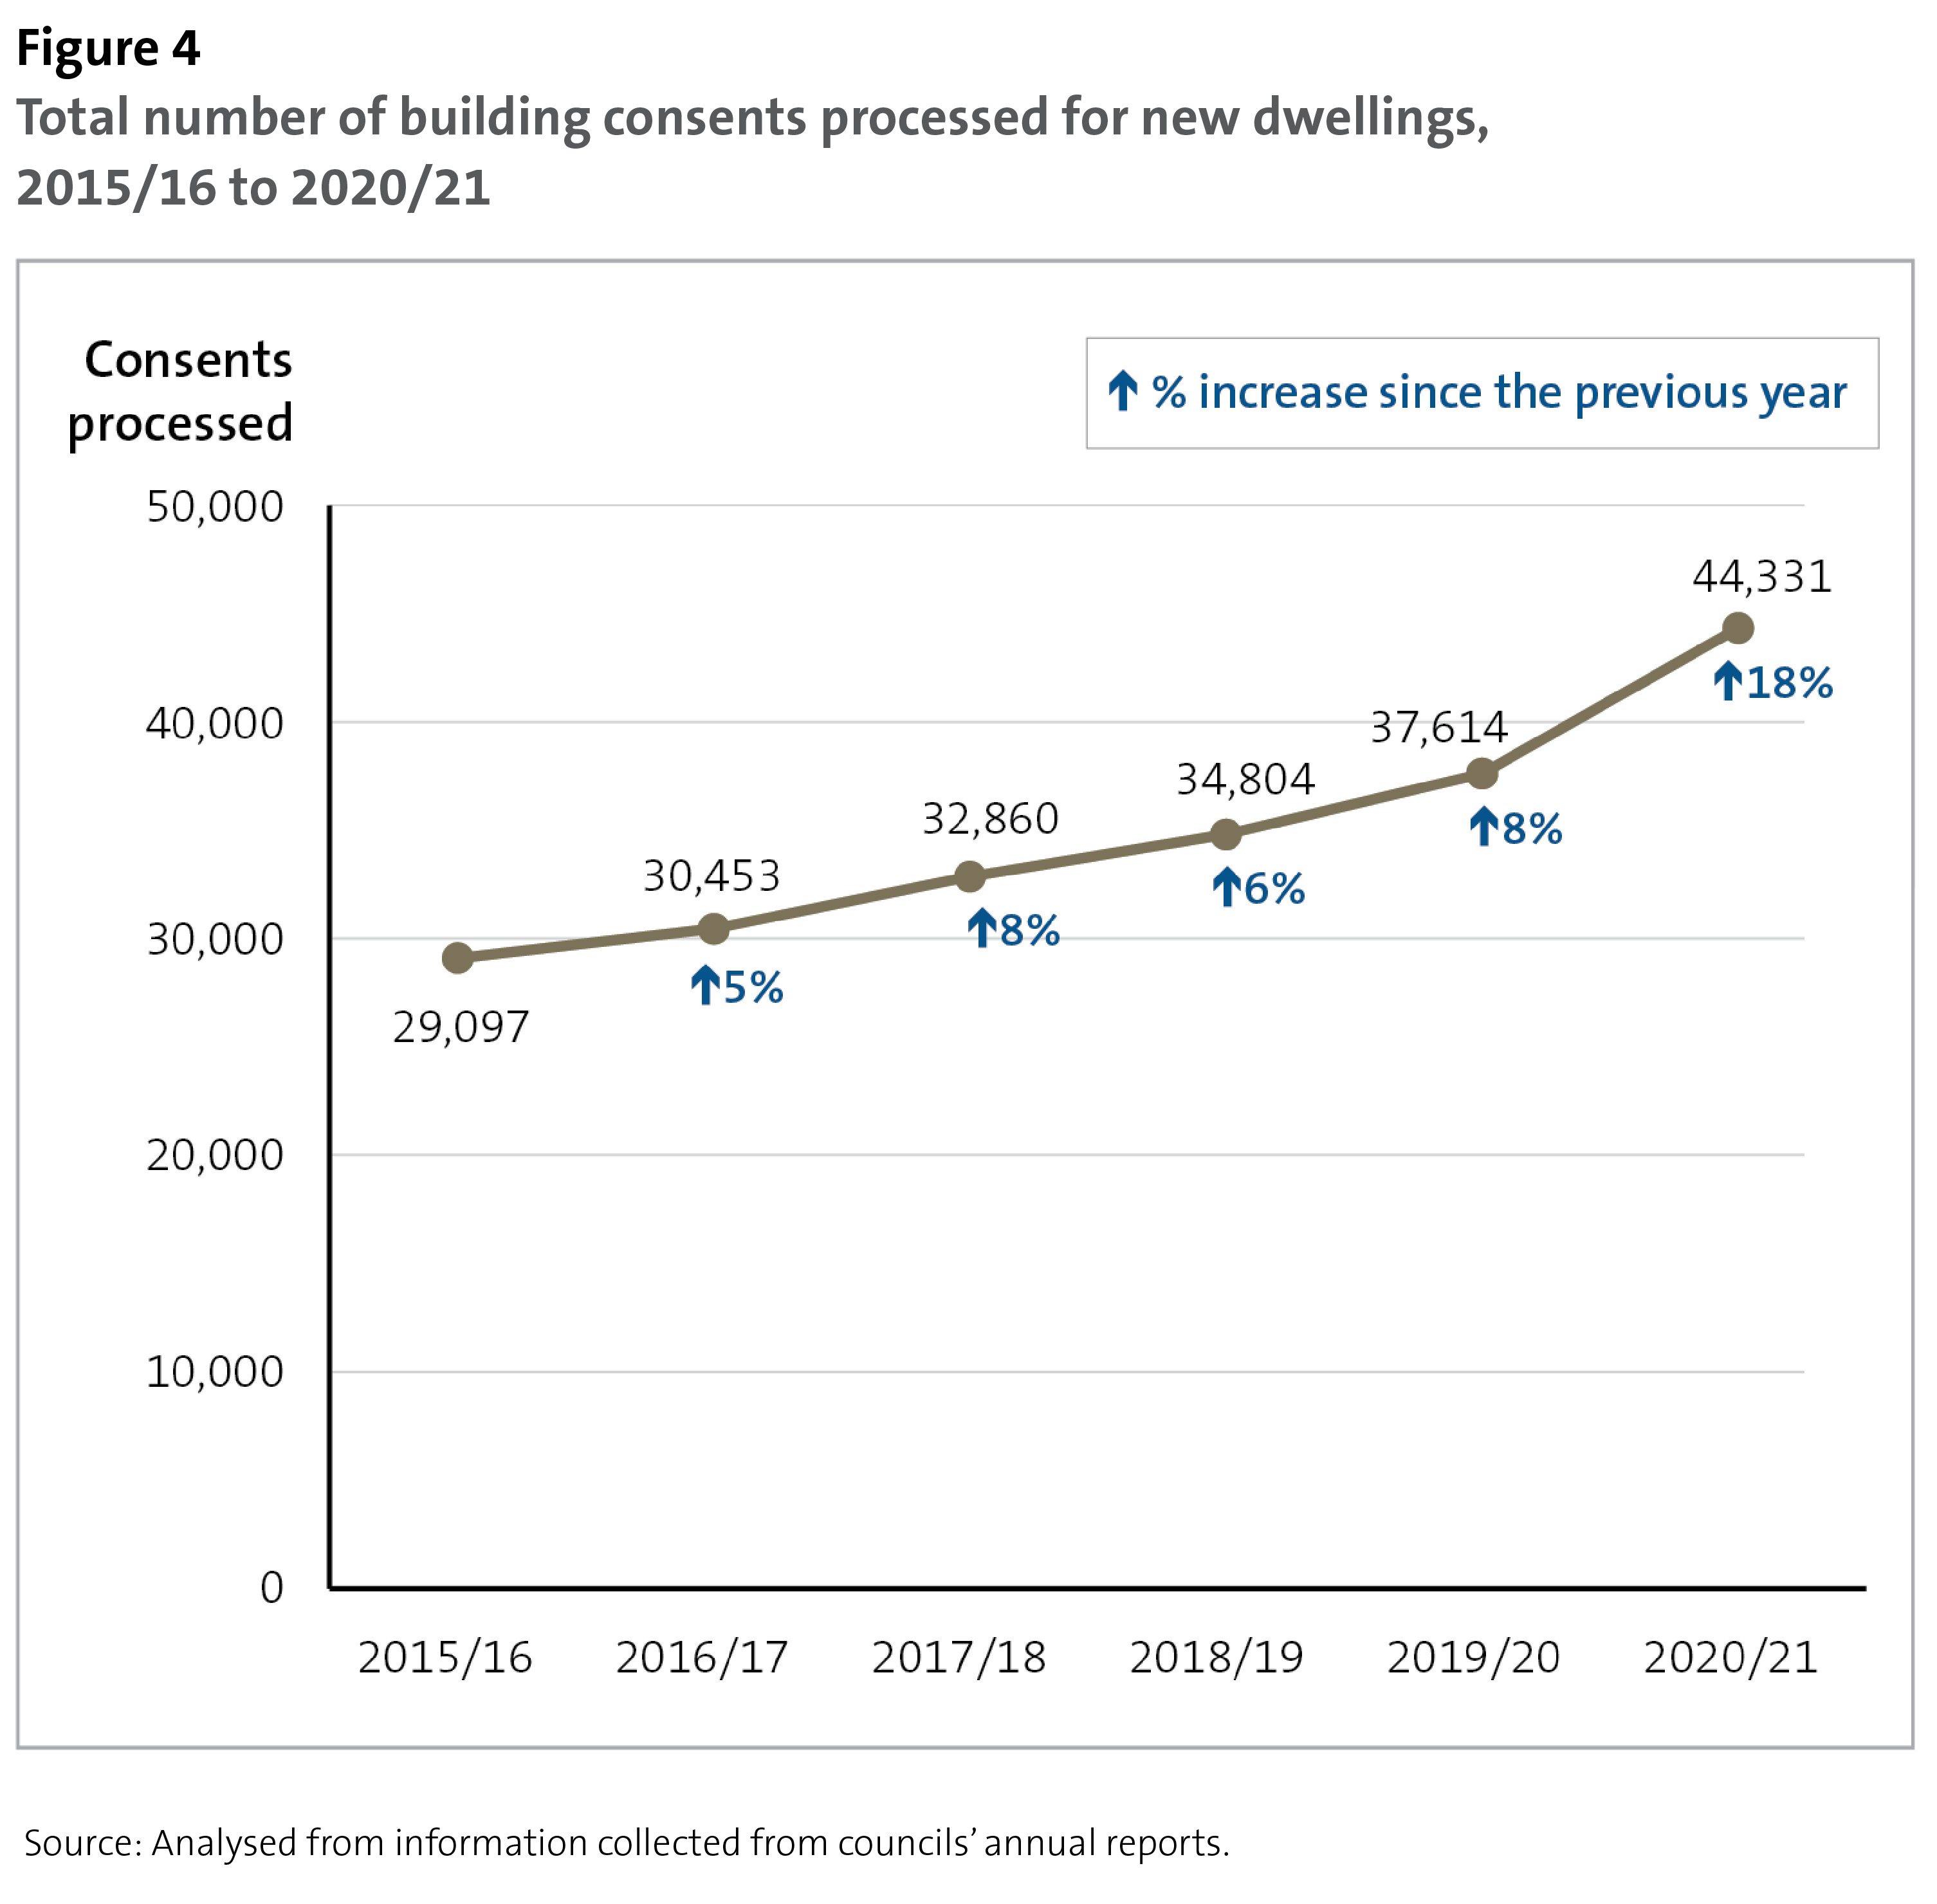 Figure 4 - Total number of building consents processed for new dwellings, 2015/16 to 2020/21